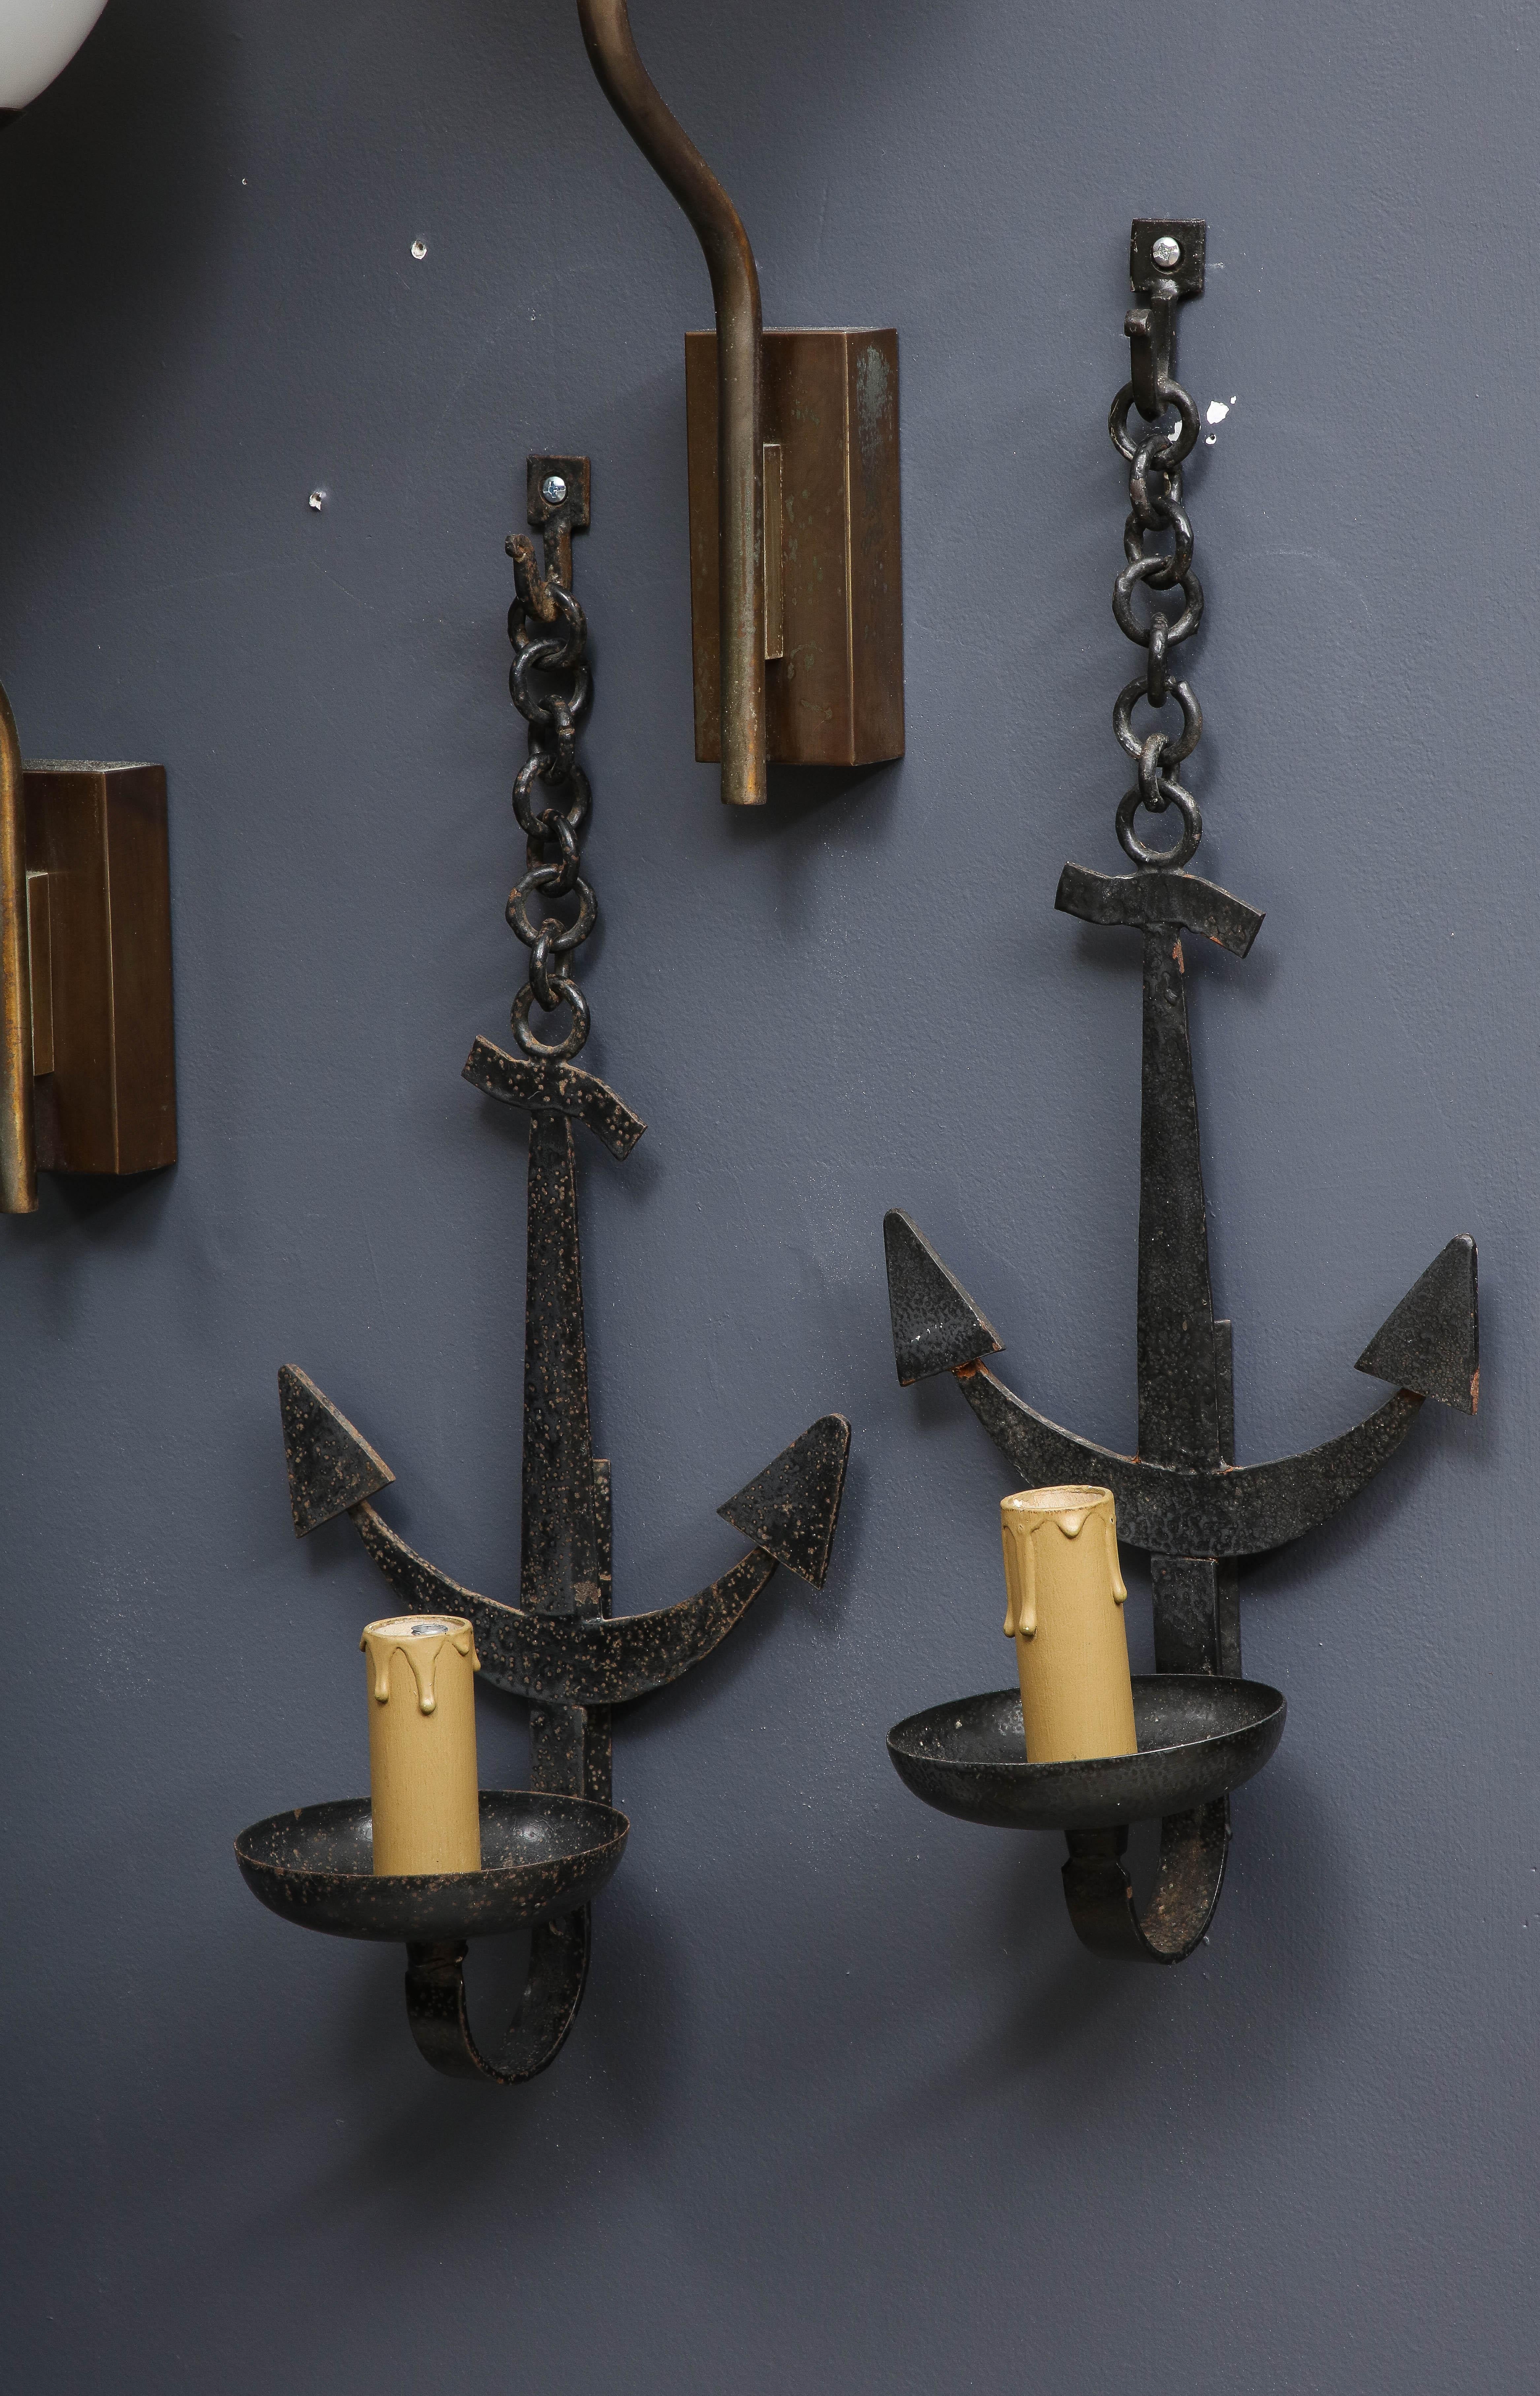 Pair of Brutalist-style midcentury French wrought iron anchor-shaped wall sconces. The anchor hangs from a chain, hooks as shown are included. Each sconce holds a single candle socket. Price includes rewiring for US and repainting
